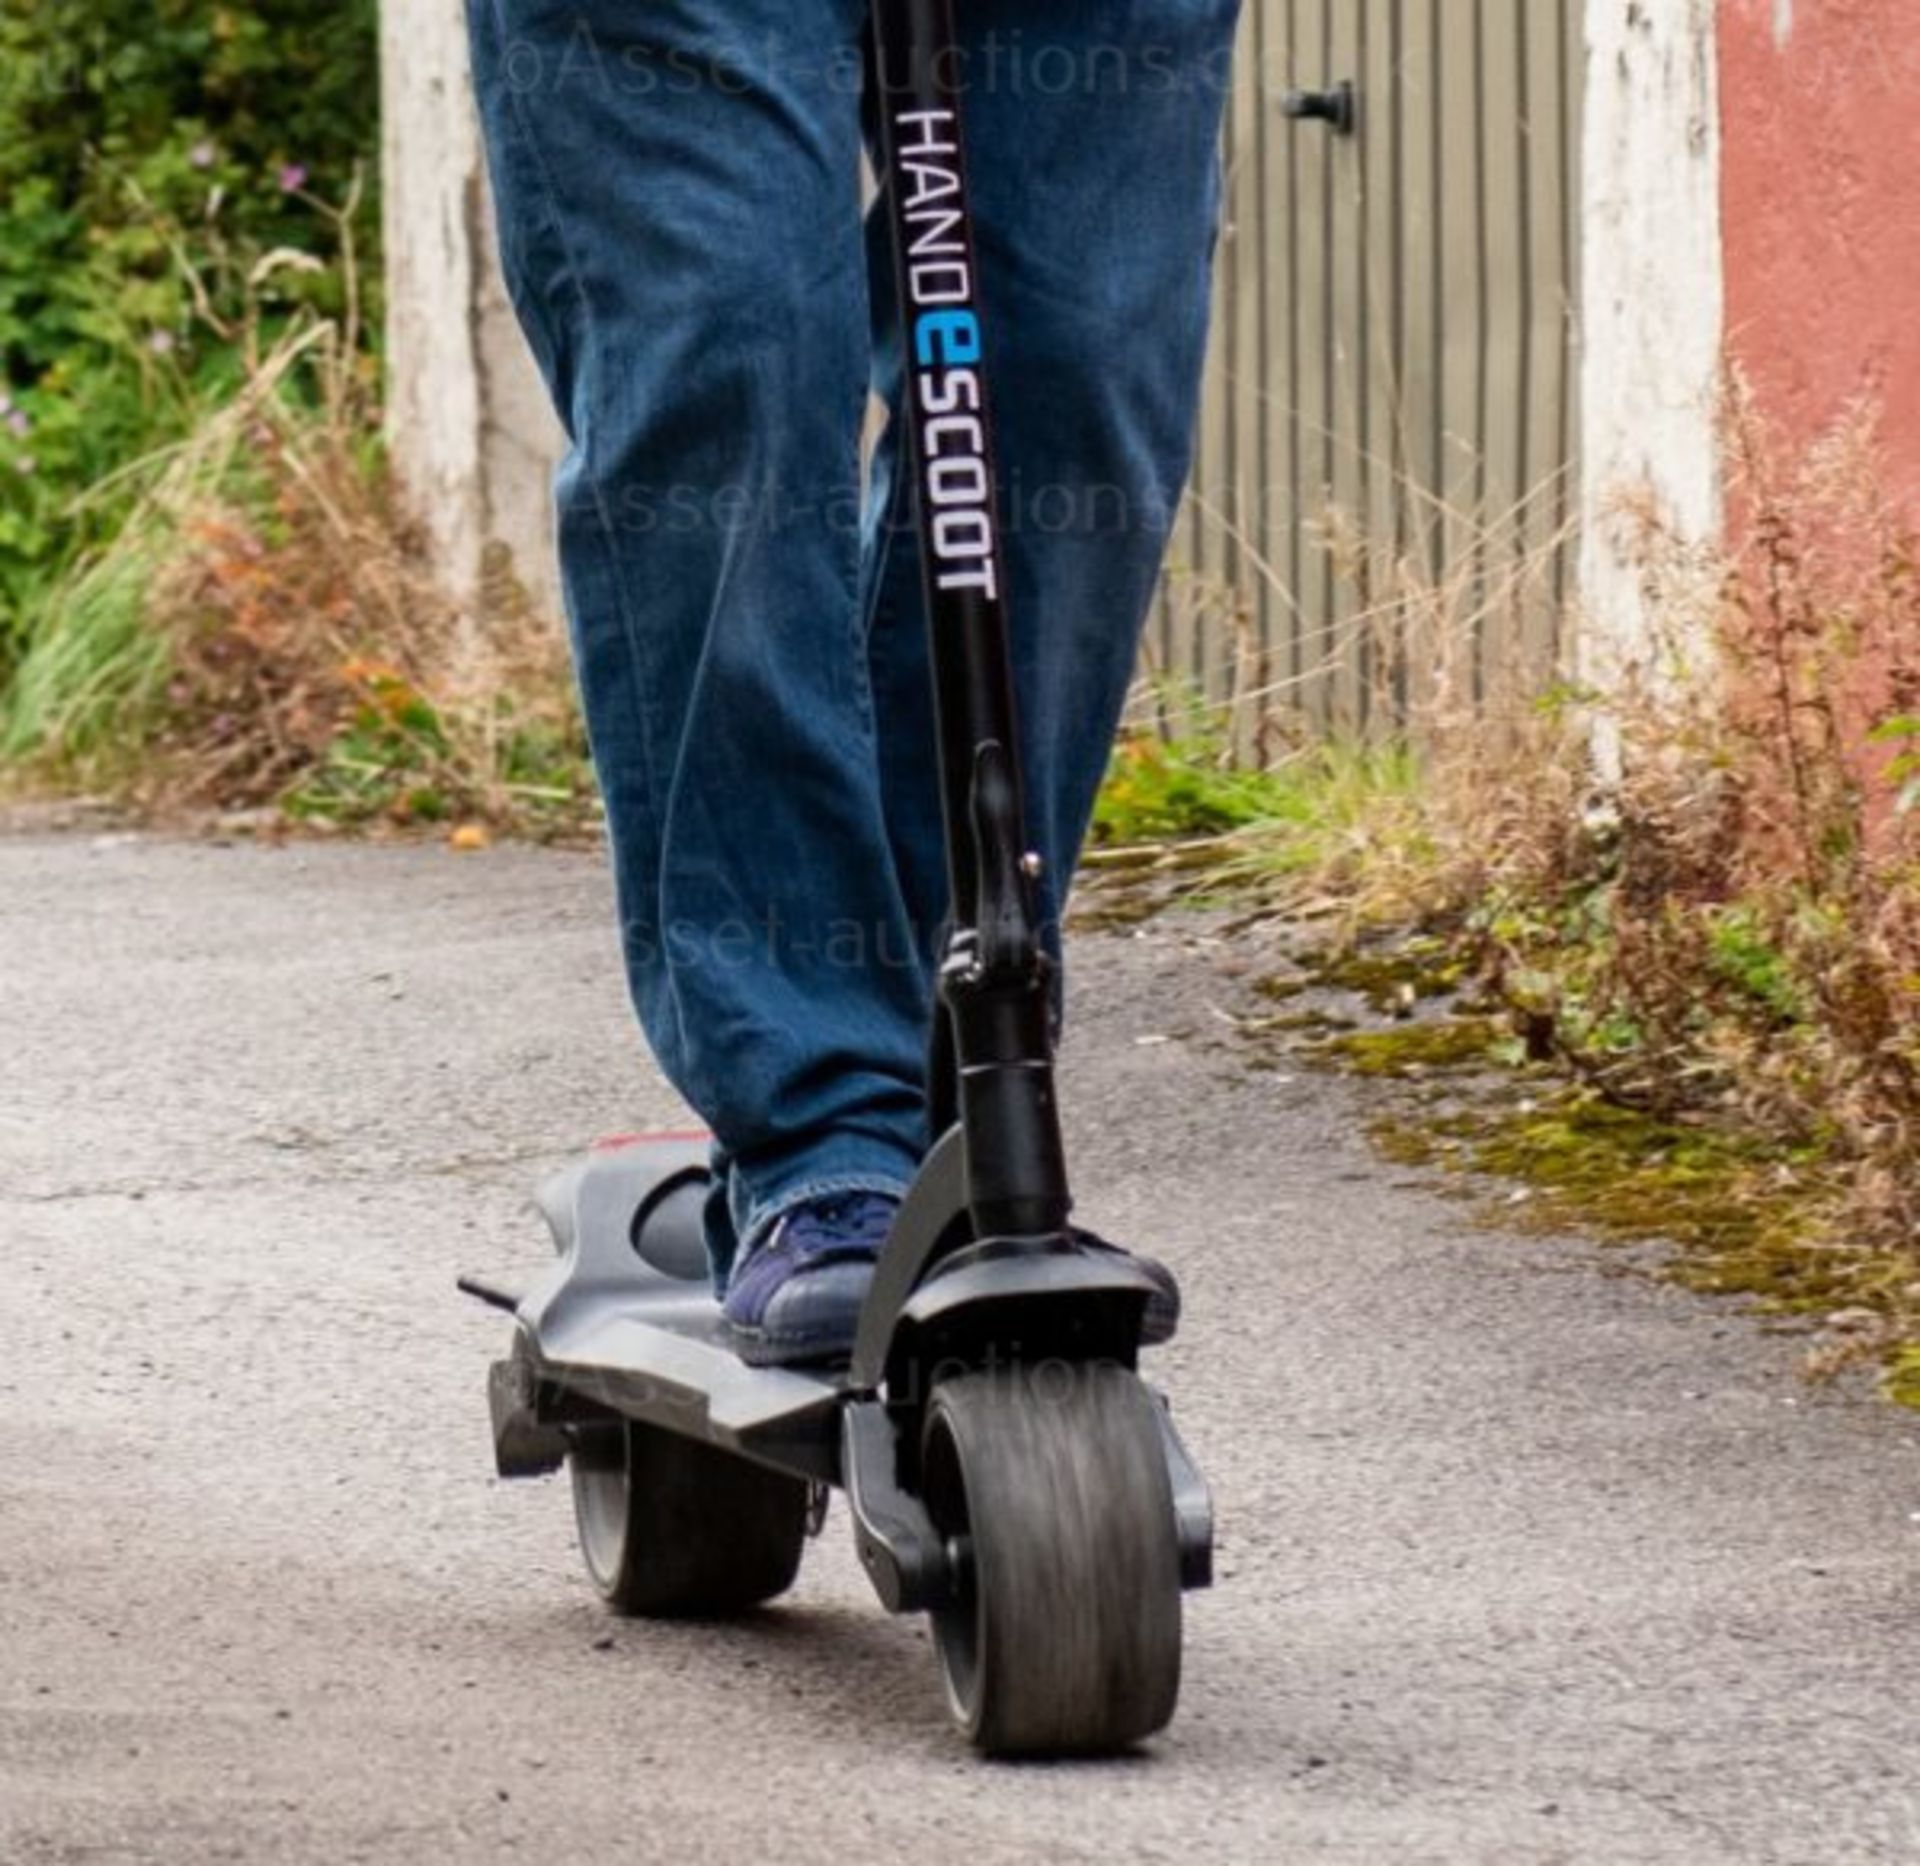 BRAND NEW HANDESCOOT ELECTRIC SCOOTER, WIDE WHEELS, £60 OF HANDESCOOT EXTRAS INCLUDED *PLUS VAT* - Image 3 of 6